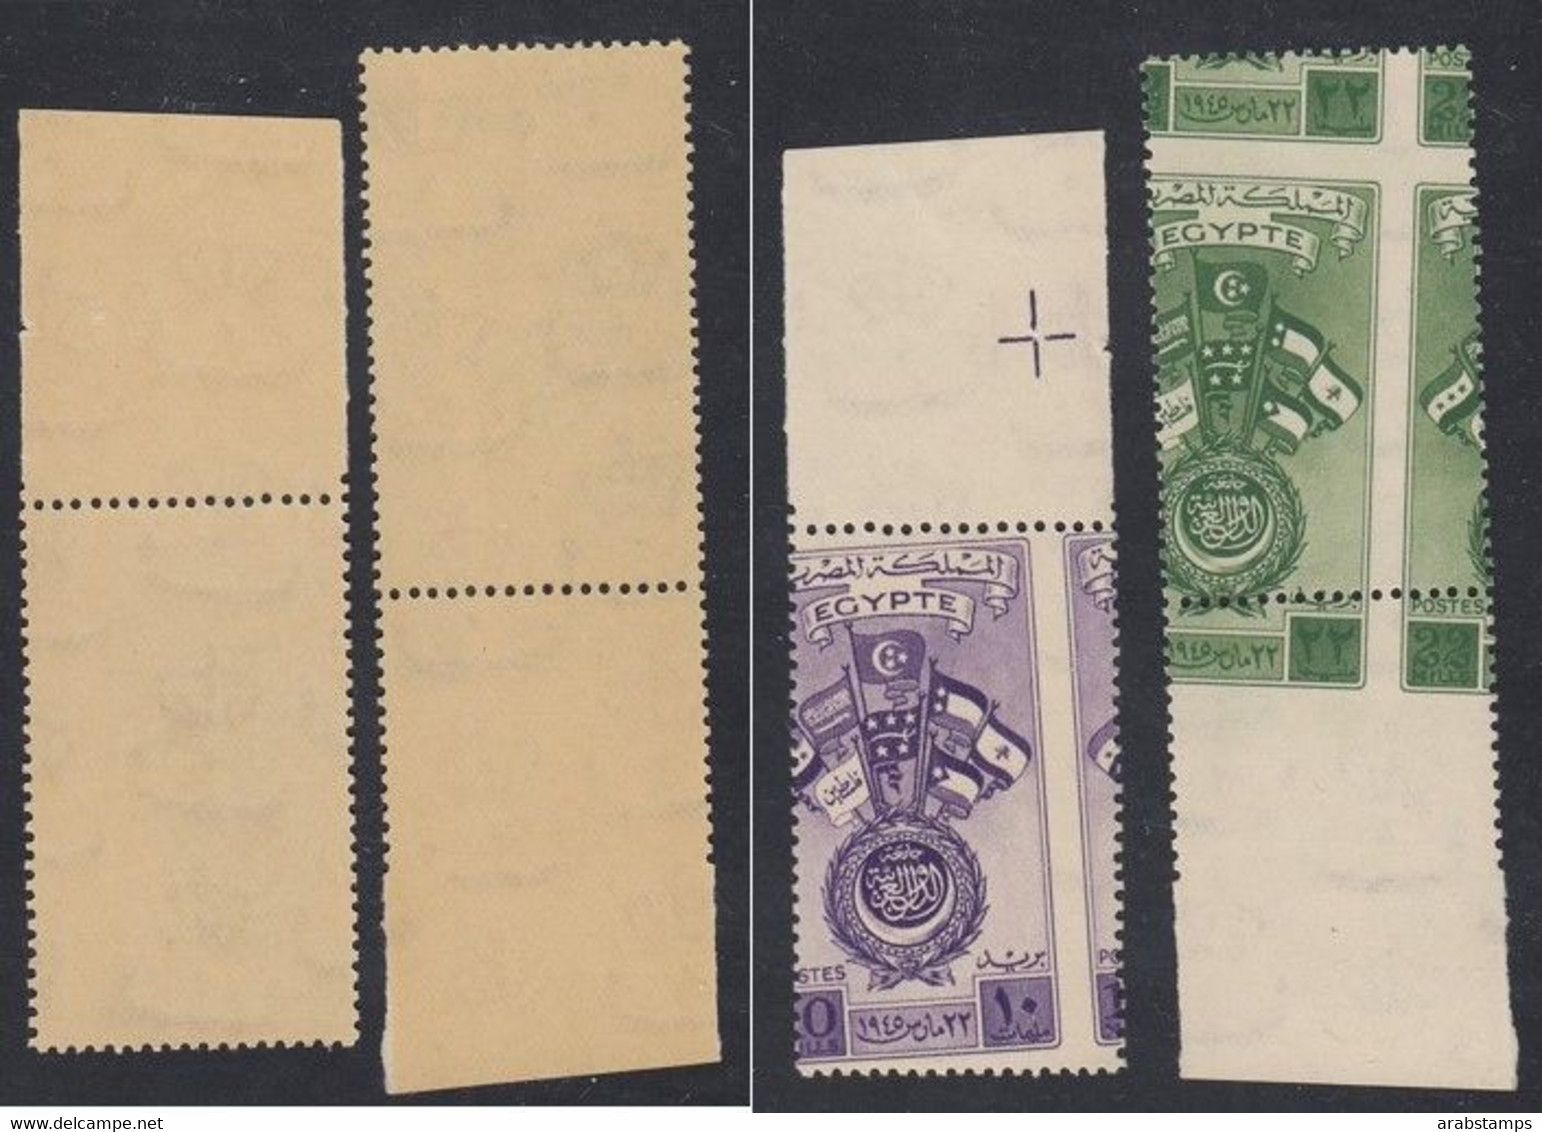 1945 Egypt Arab Nations Conference In Royal Oblique Perfs Complete Set 2values Watermark Paper With Side Of Sheet S.G.30 - Unused Stamps